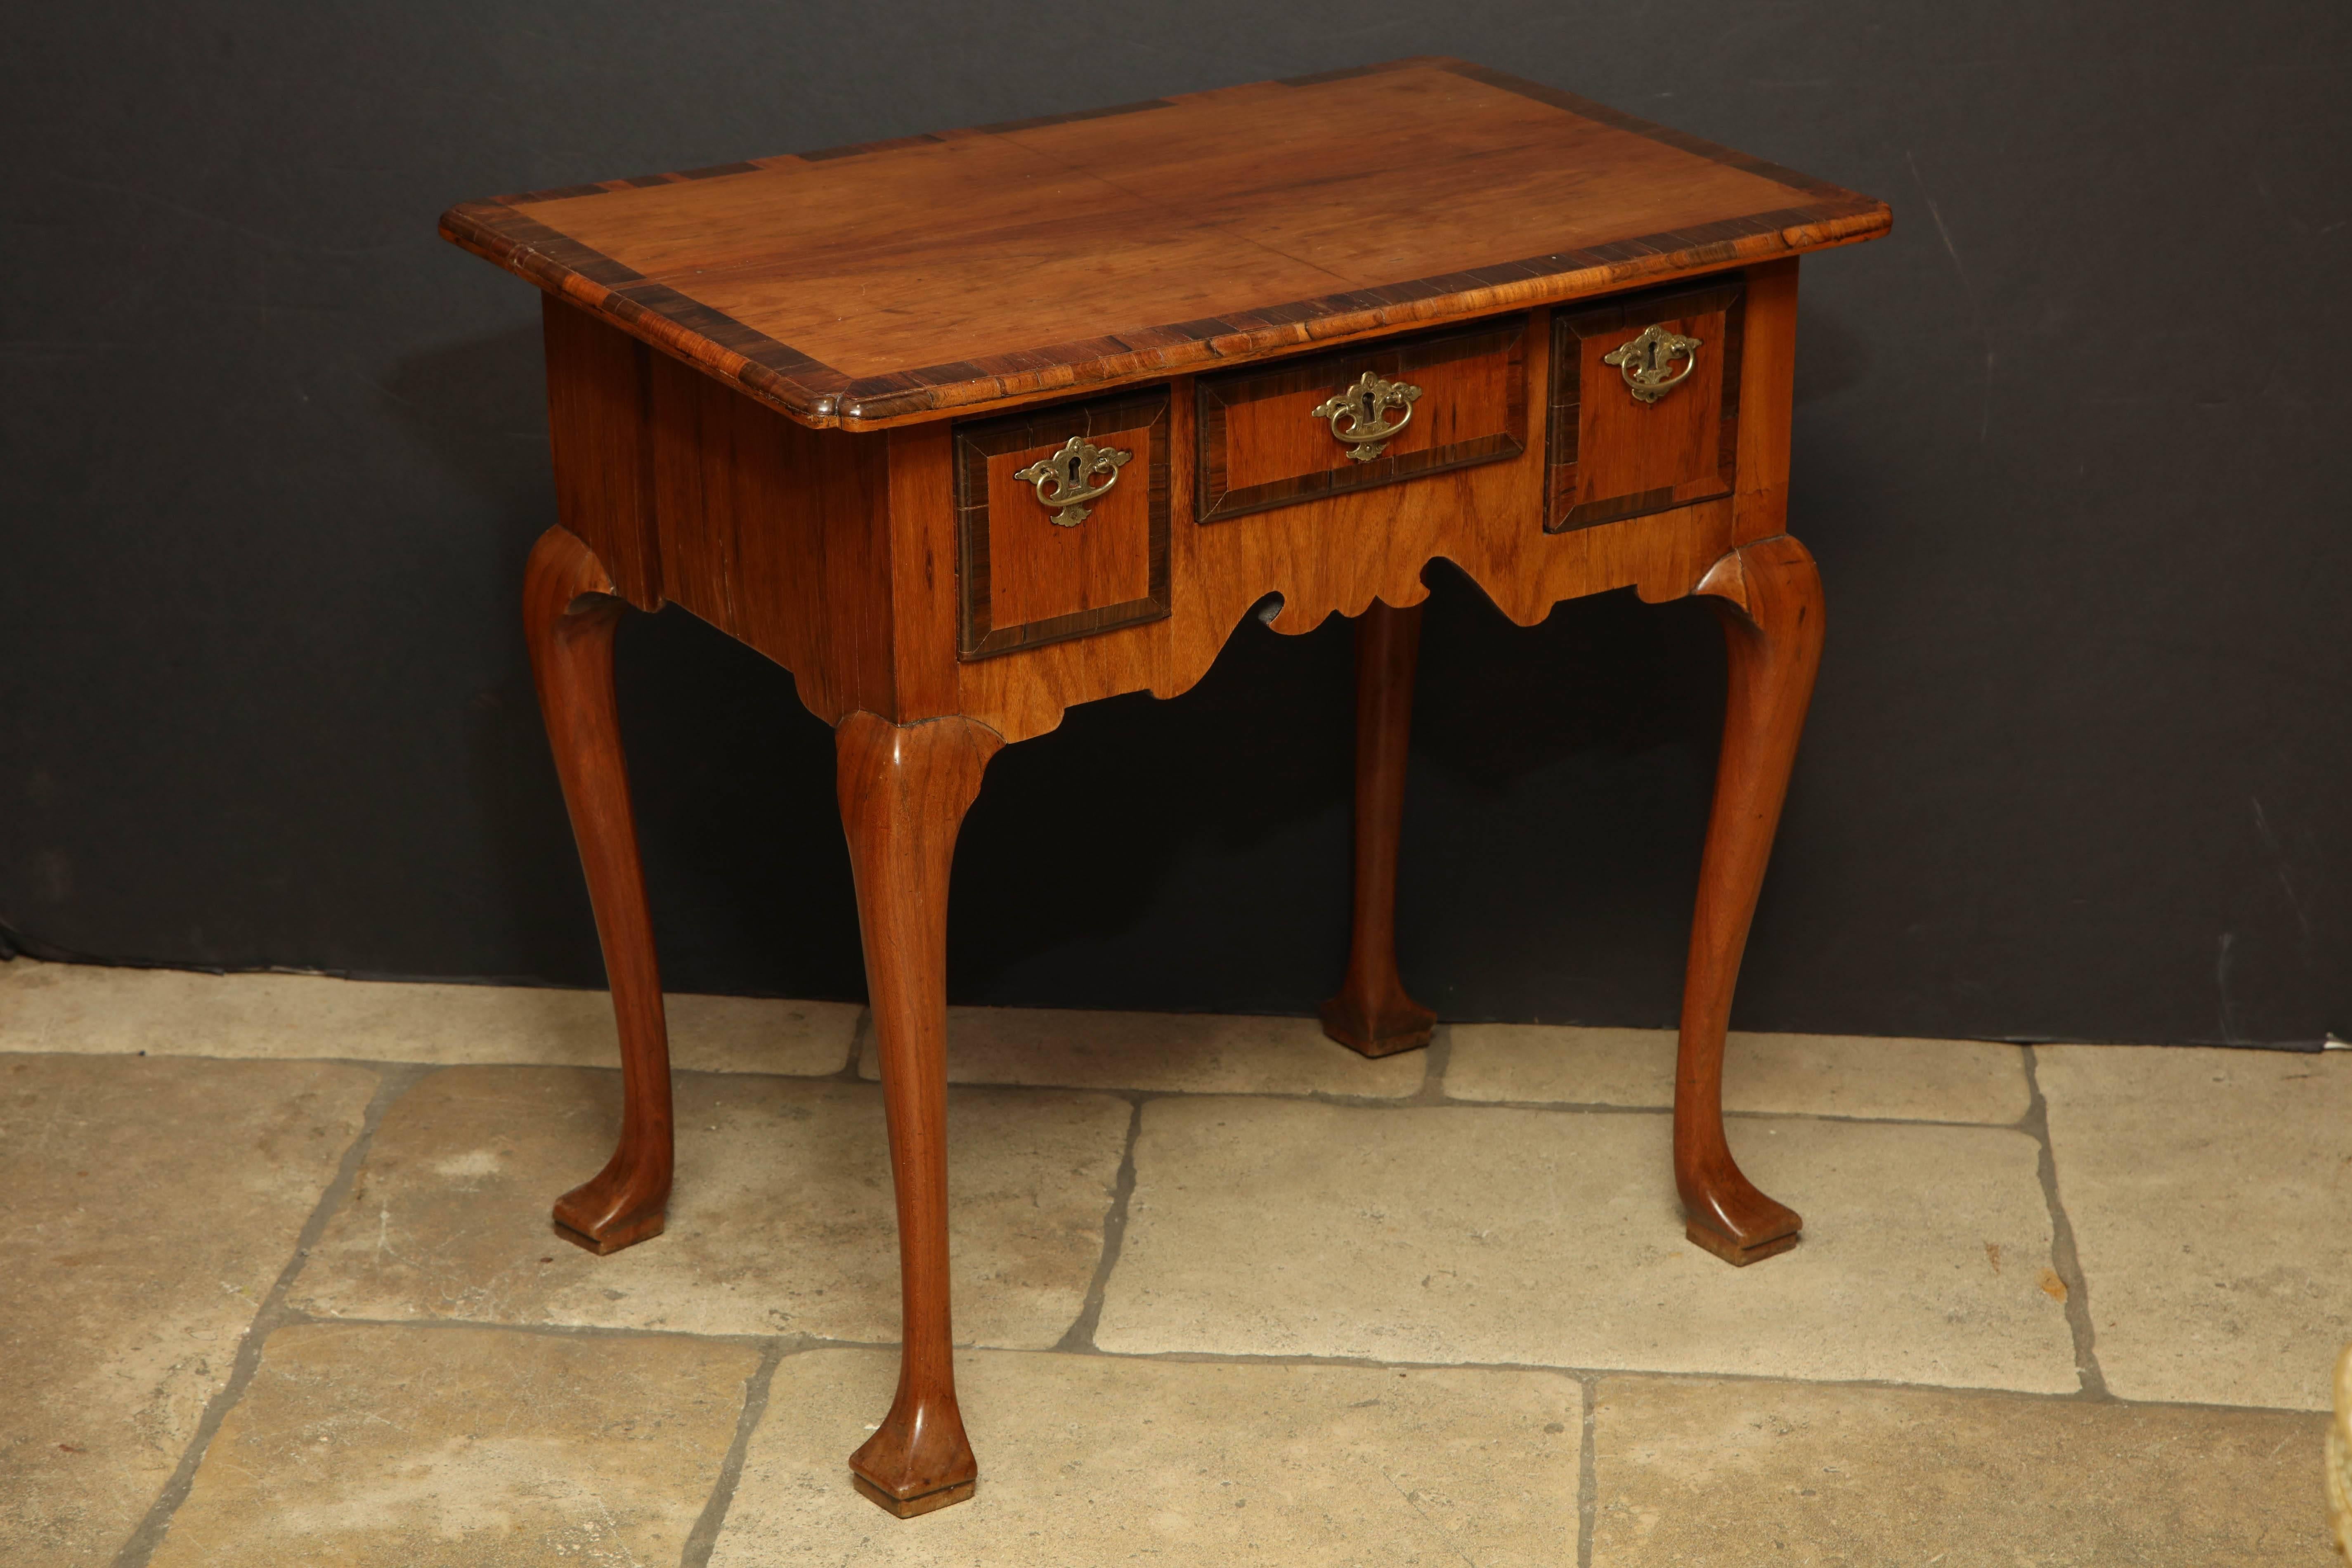 Queen Anne cross banded walnut three drawer low boy or dressing table with cabriole legs and squared trifid feet.